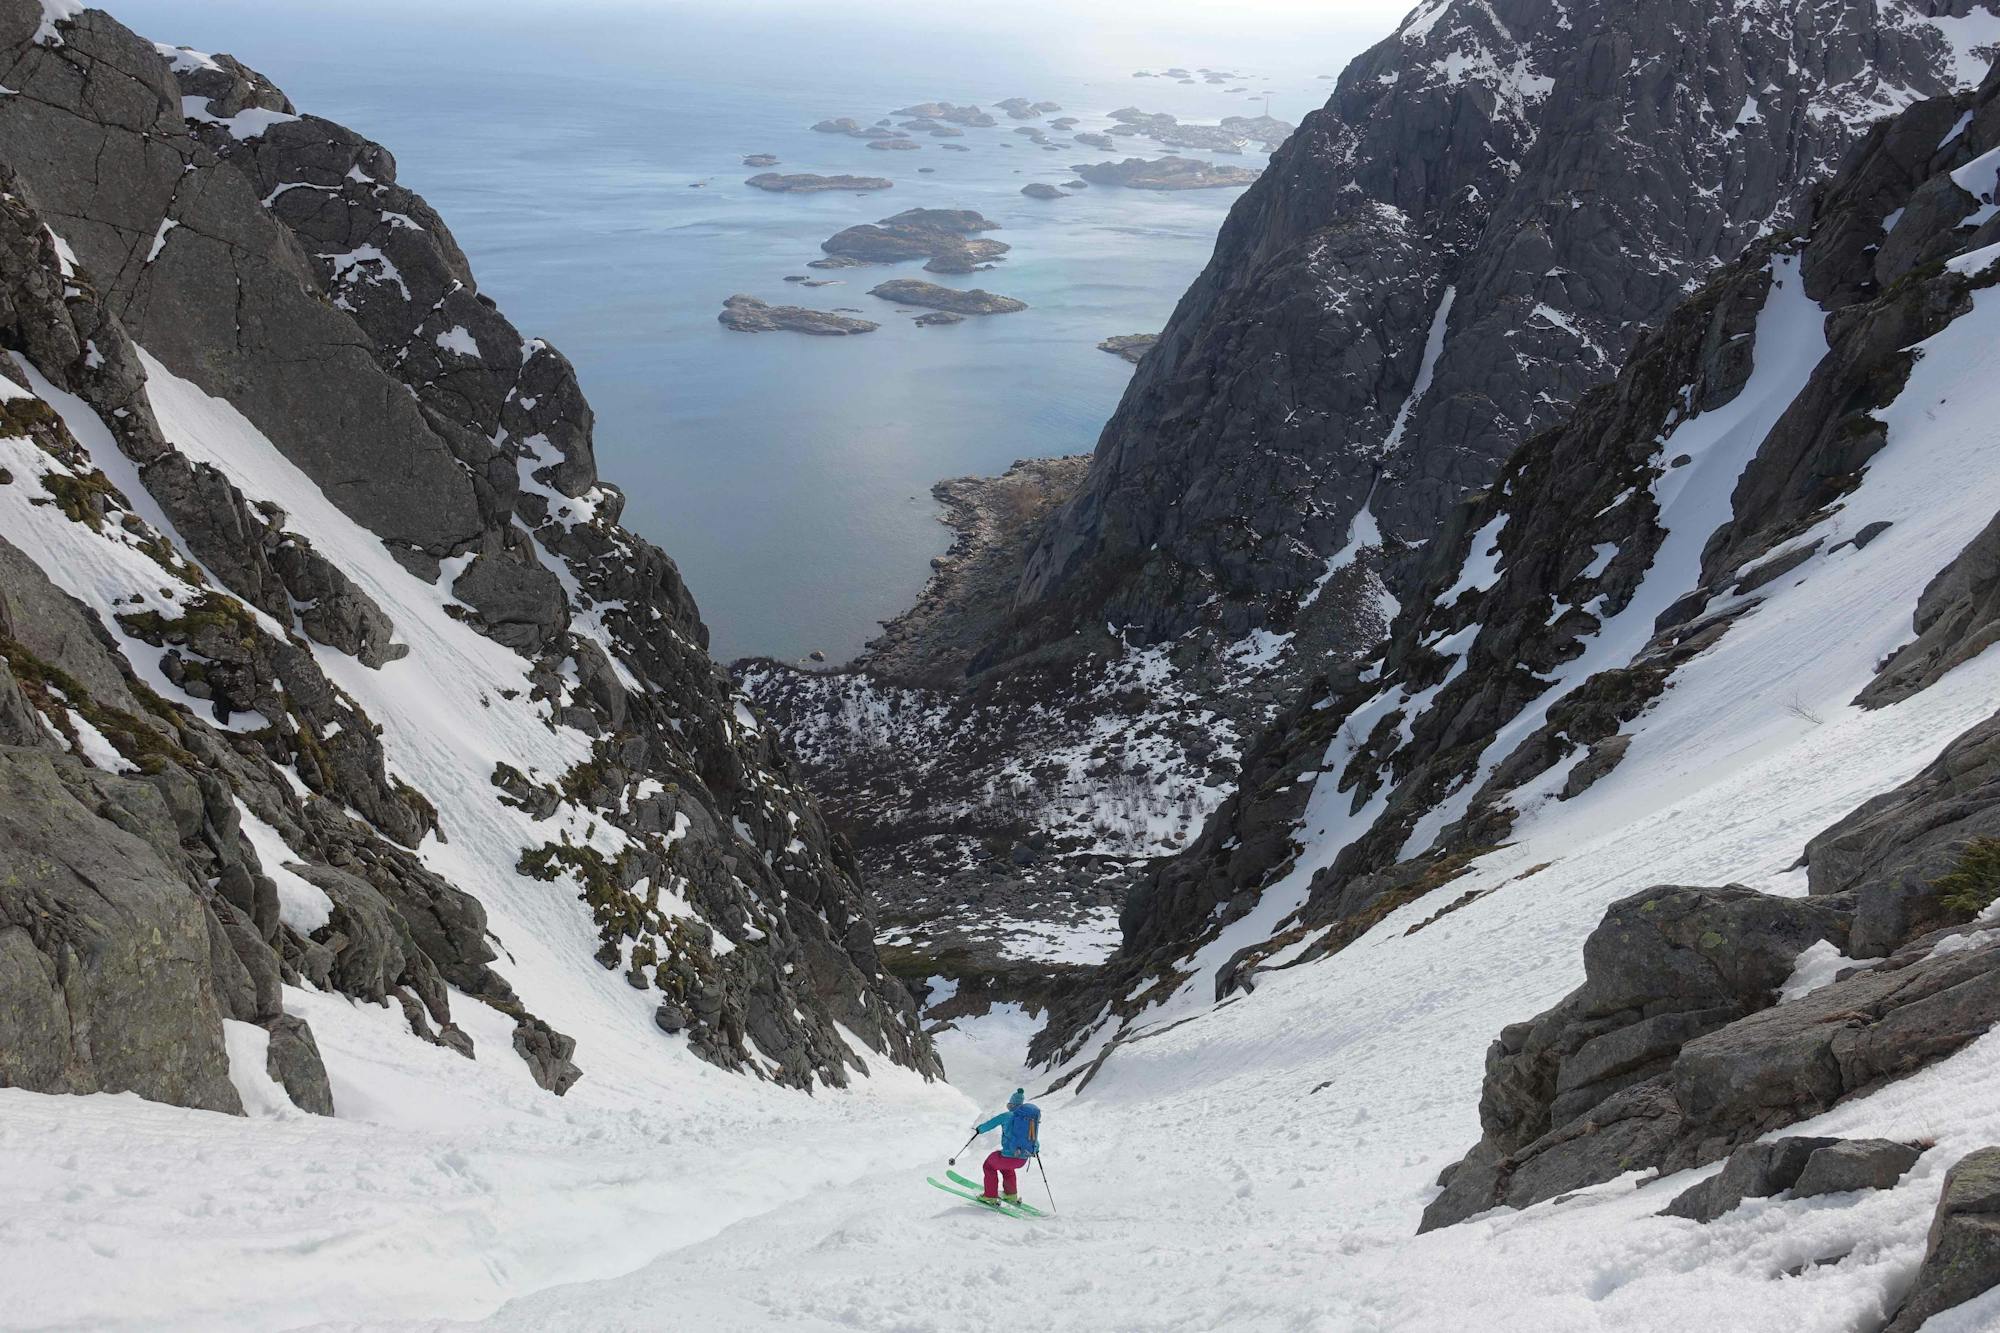 Skiing above the coast; magnificent Lofoten couloir skiing.